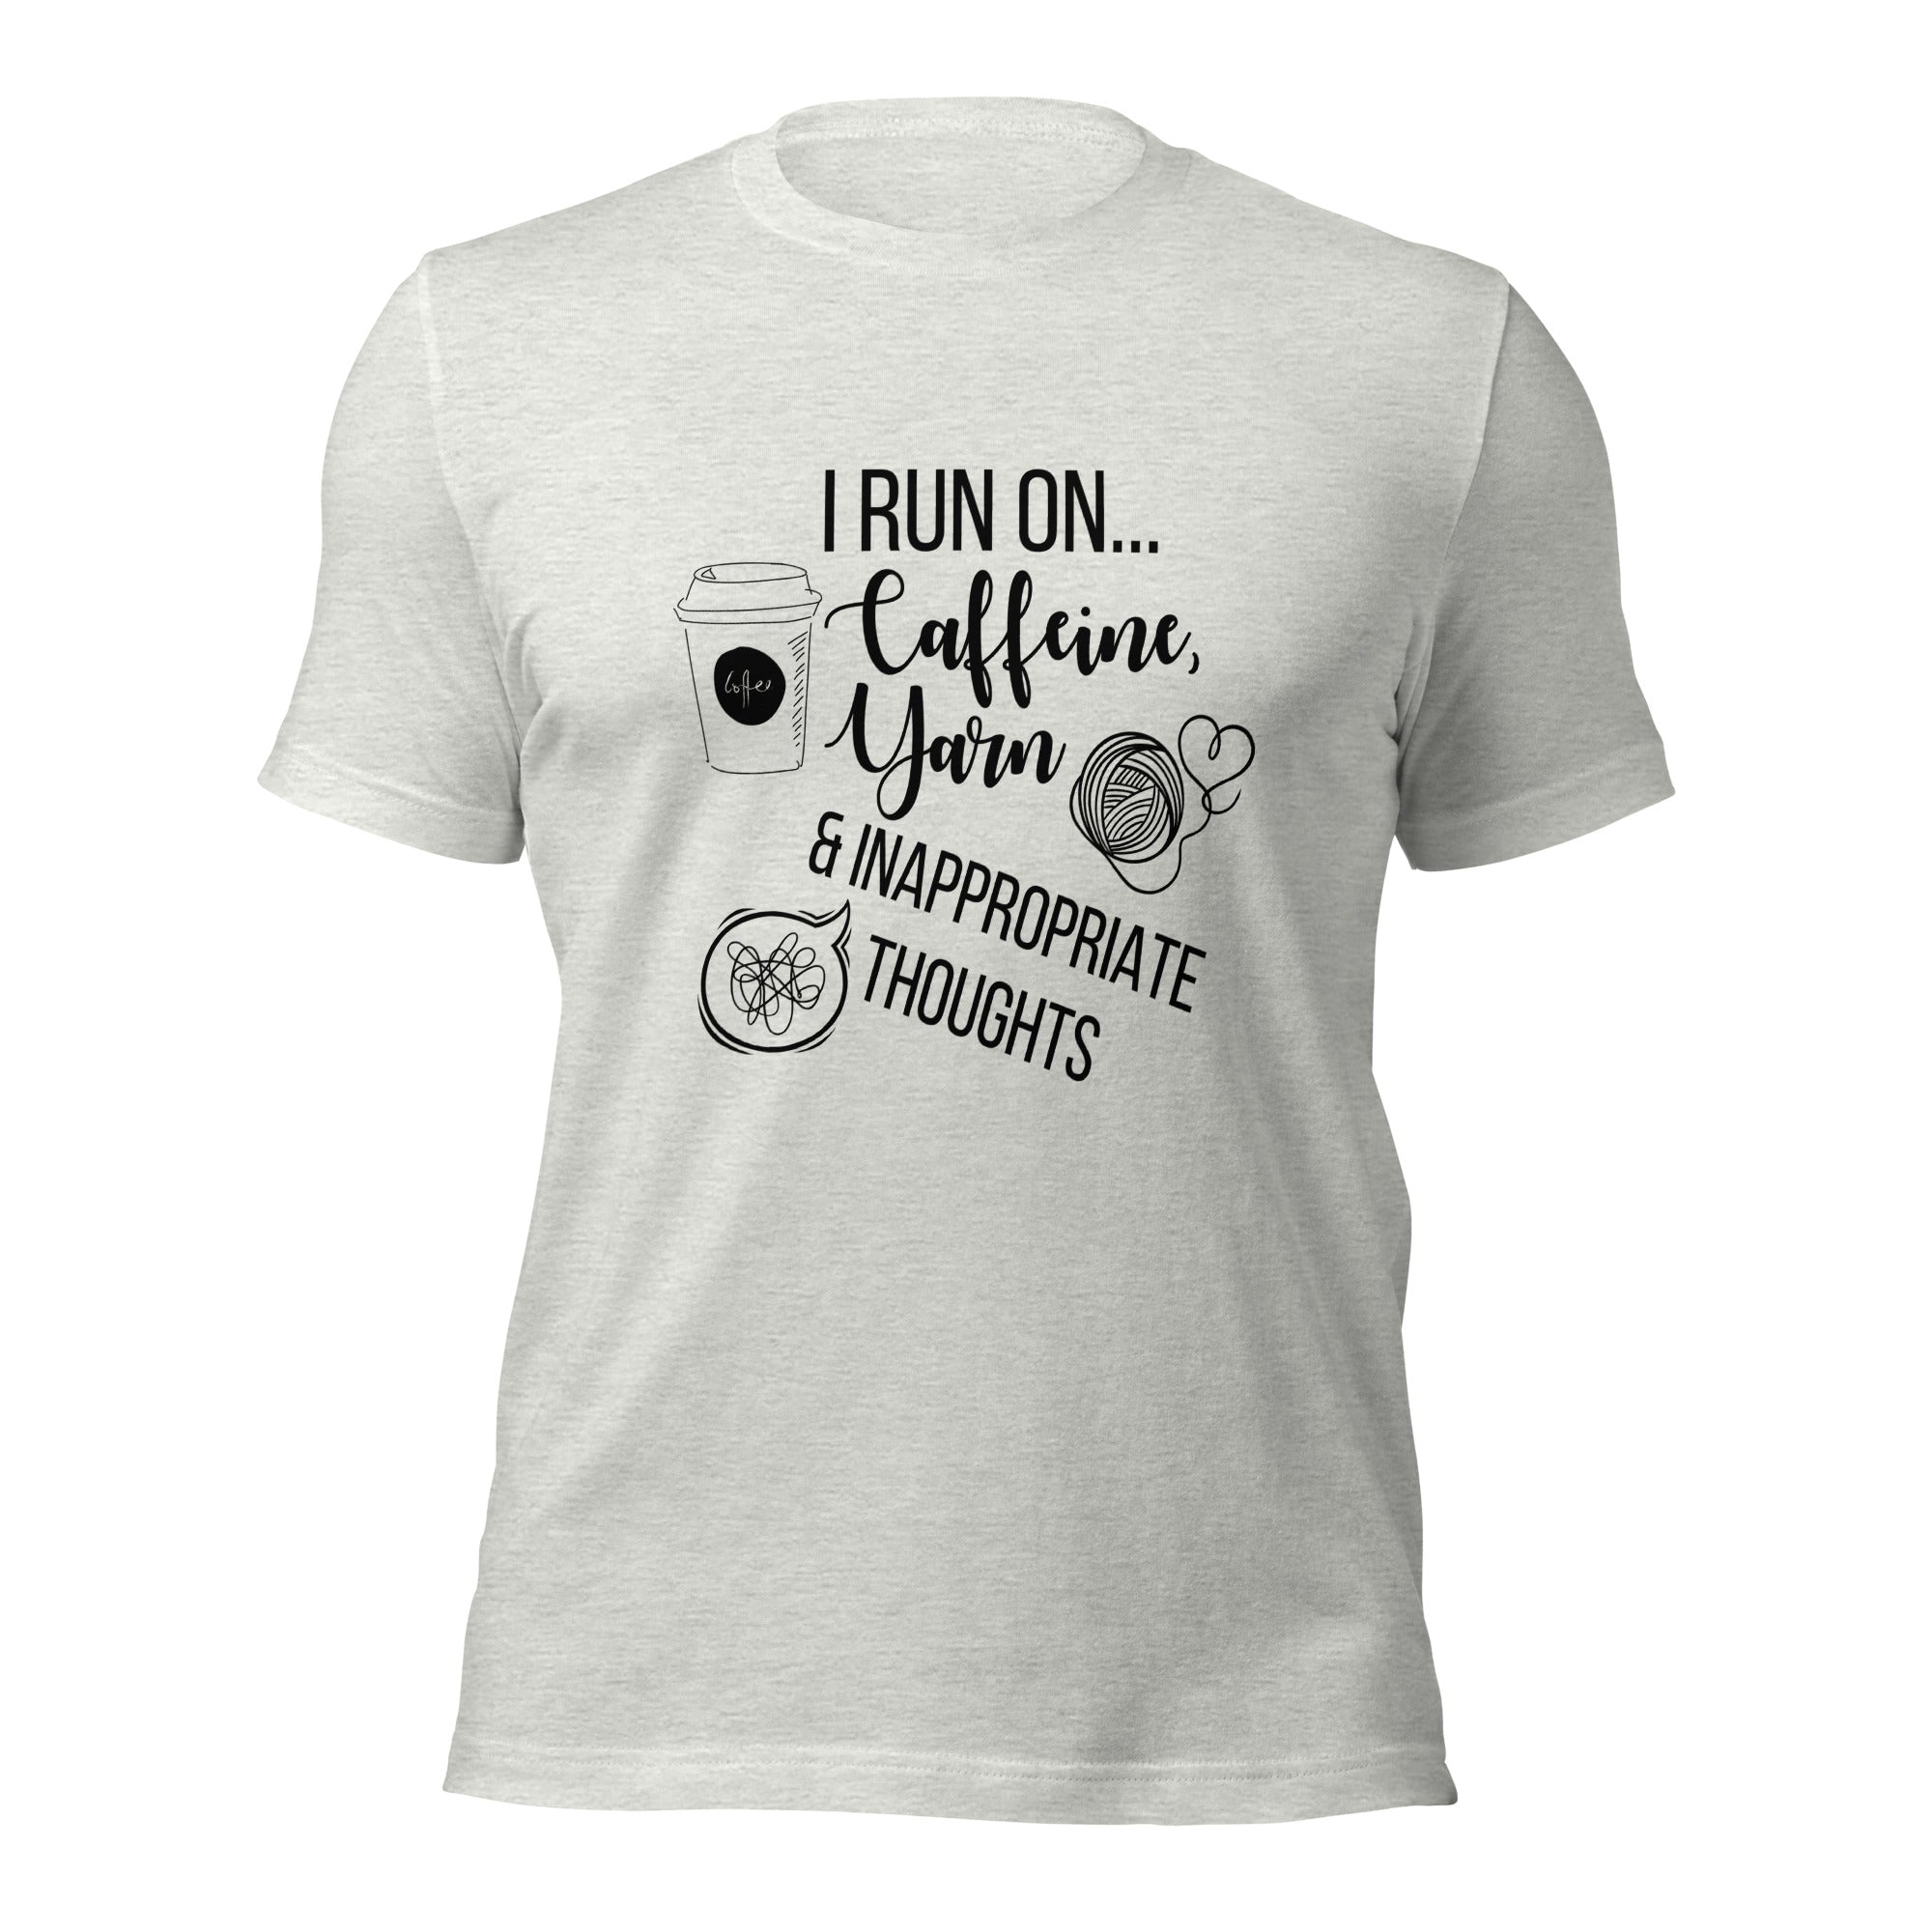 "I Run On Caffeine, Yarn, & Inappropriate Thoughts" Unisex Scoop Neck T-shirt, Black Text On Light Fabric